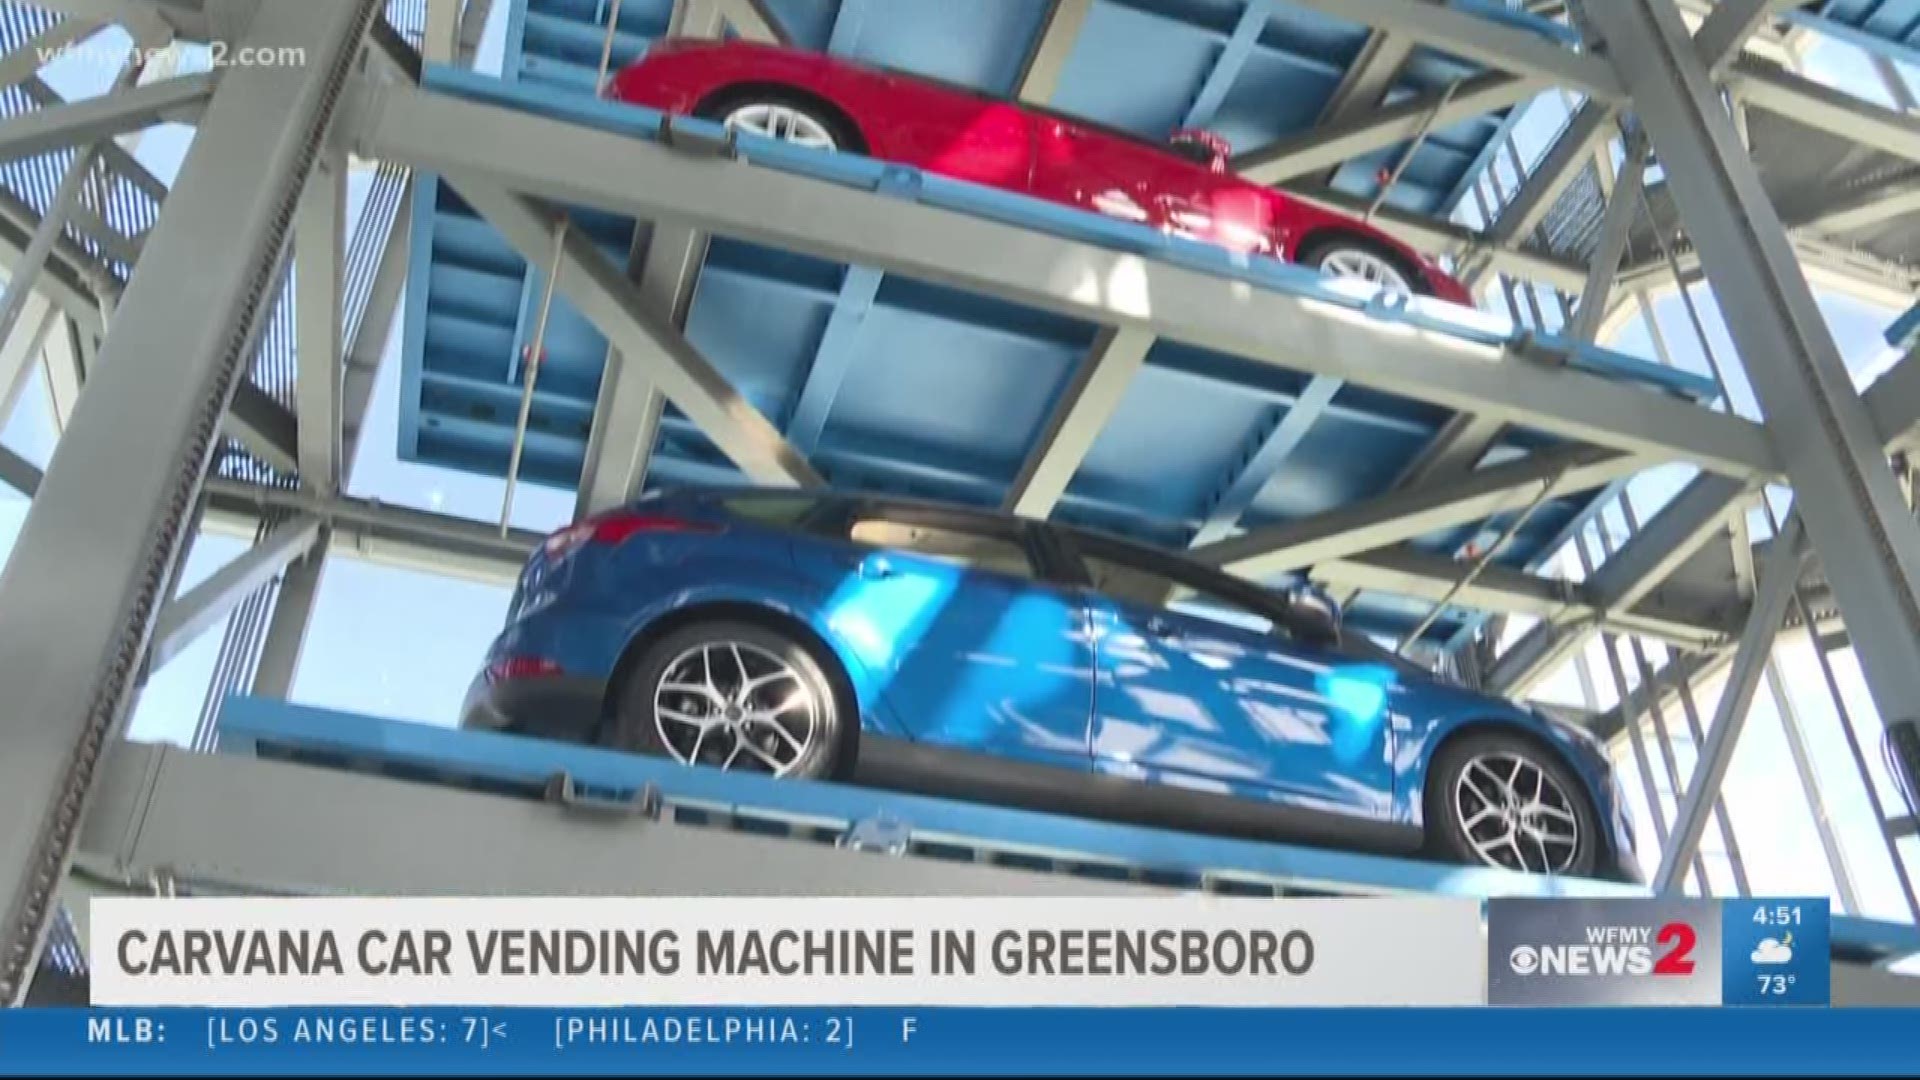 Have you ever heard of a car vending machine?
It's just like any other vending machine. You stick a coin into the slot and a car pops out ready to drive!
That's what Carvana is doing right here in Greensboro.